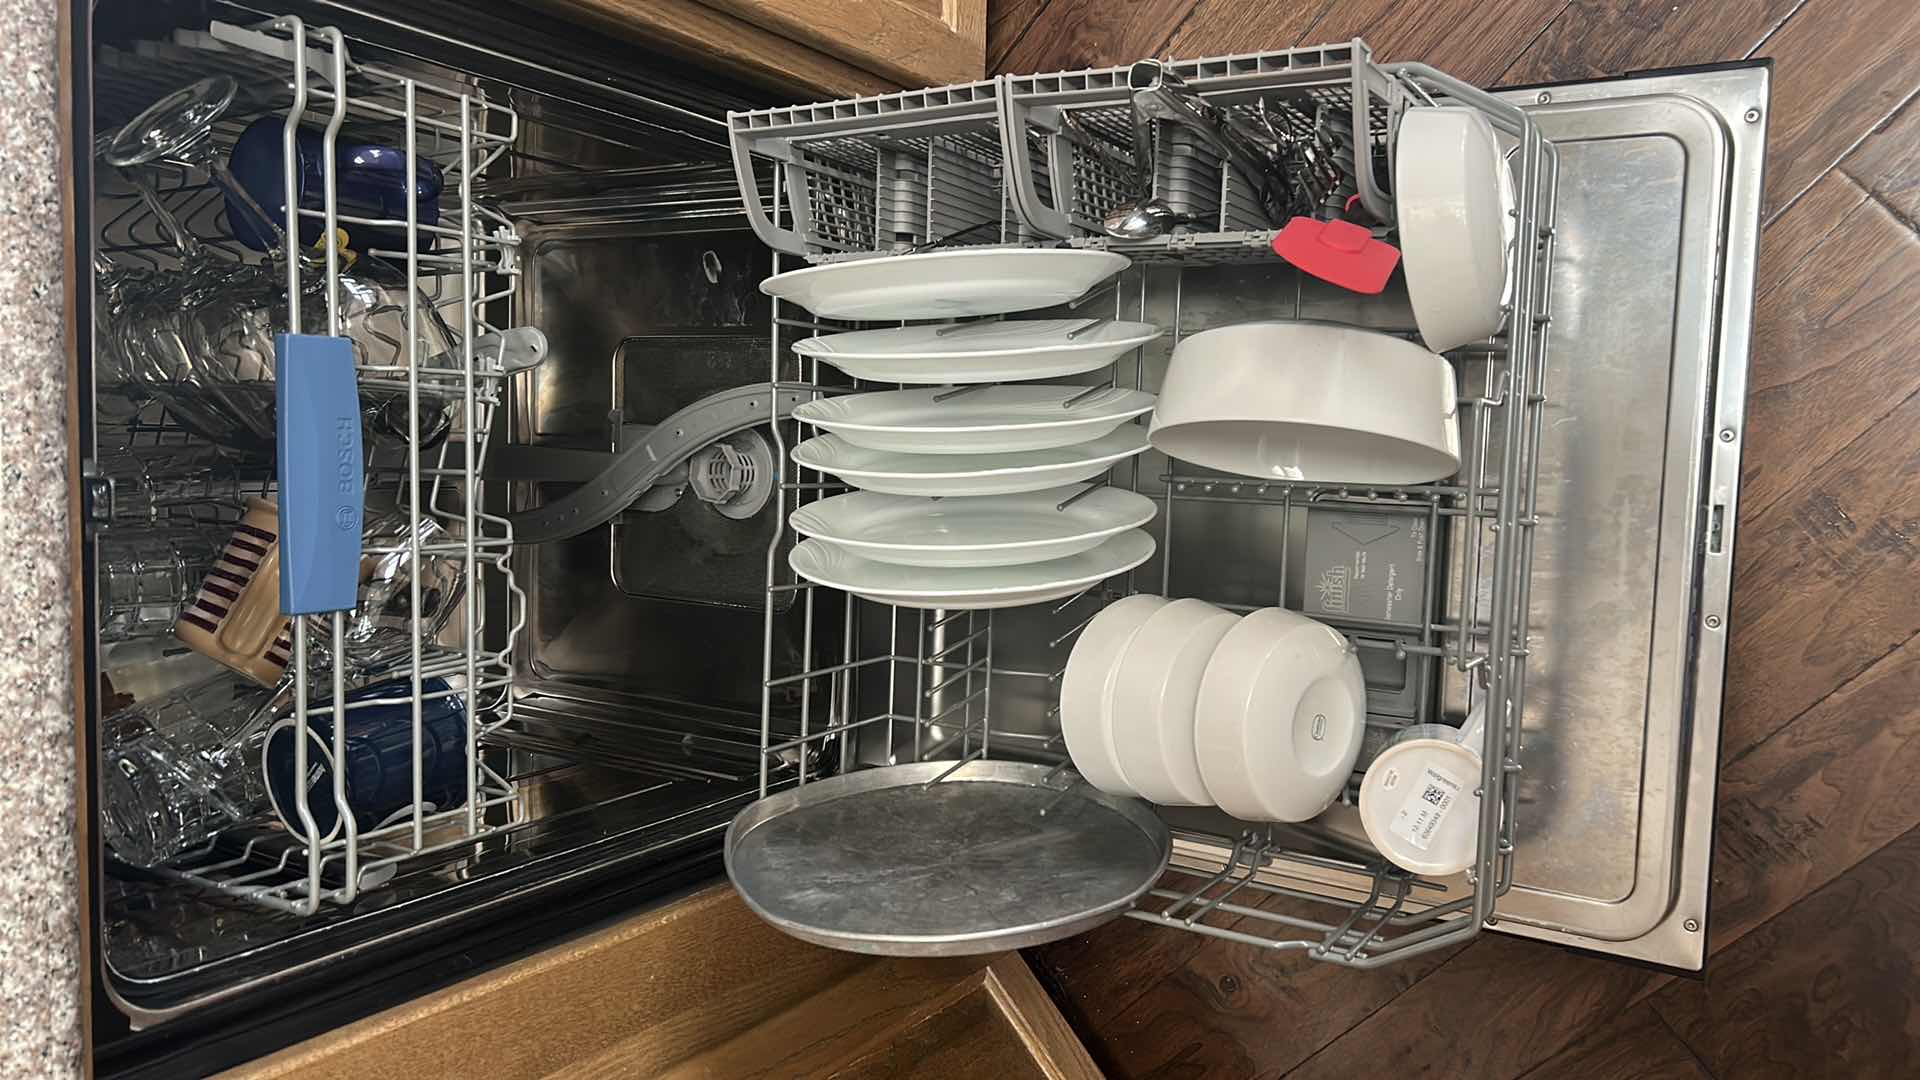 Photo 3 of CONTENTS OF DISHWASHER